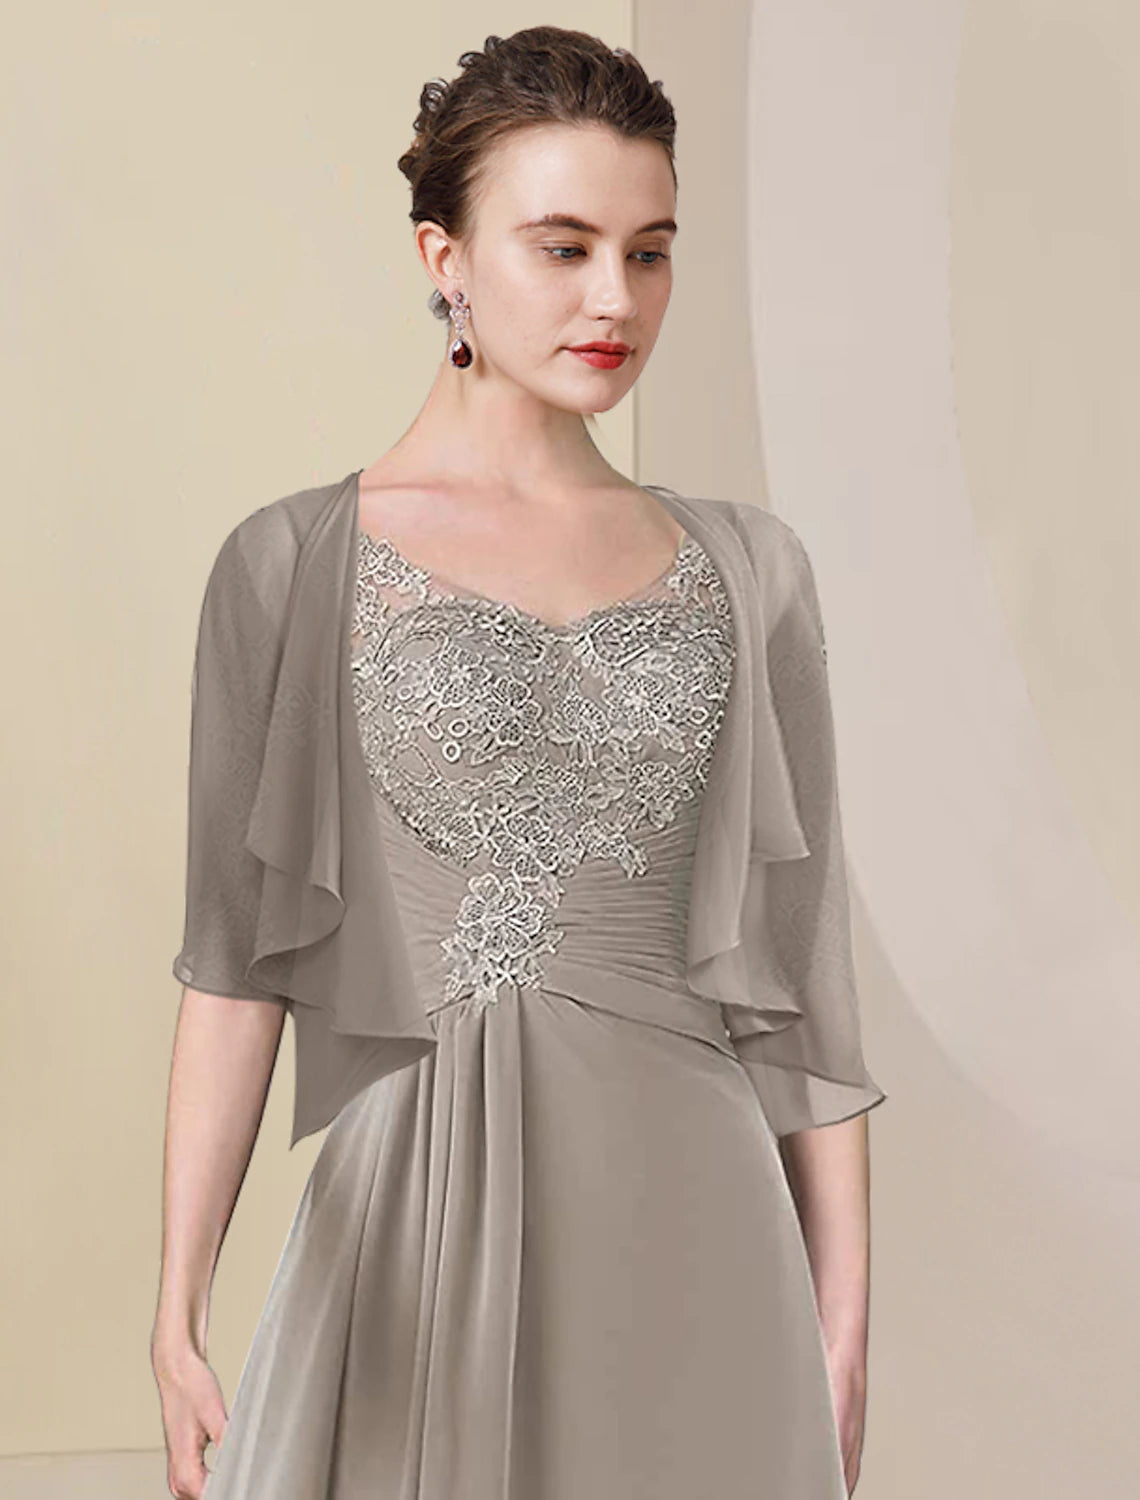 Two Piece A-Line Mother of the Bride Dress Formal Wedding Guest Elegant High Low V Neck Asymmetrical Tea Length Chiffon Lace Half Sleeve Wrap Included with Ruched Appliques